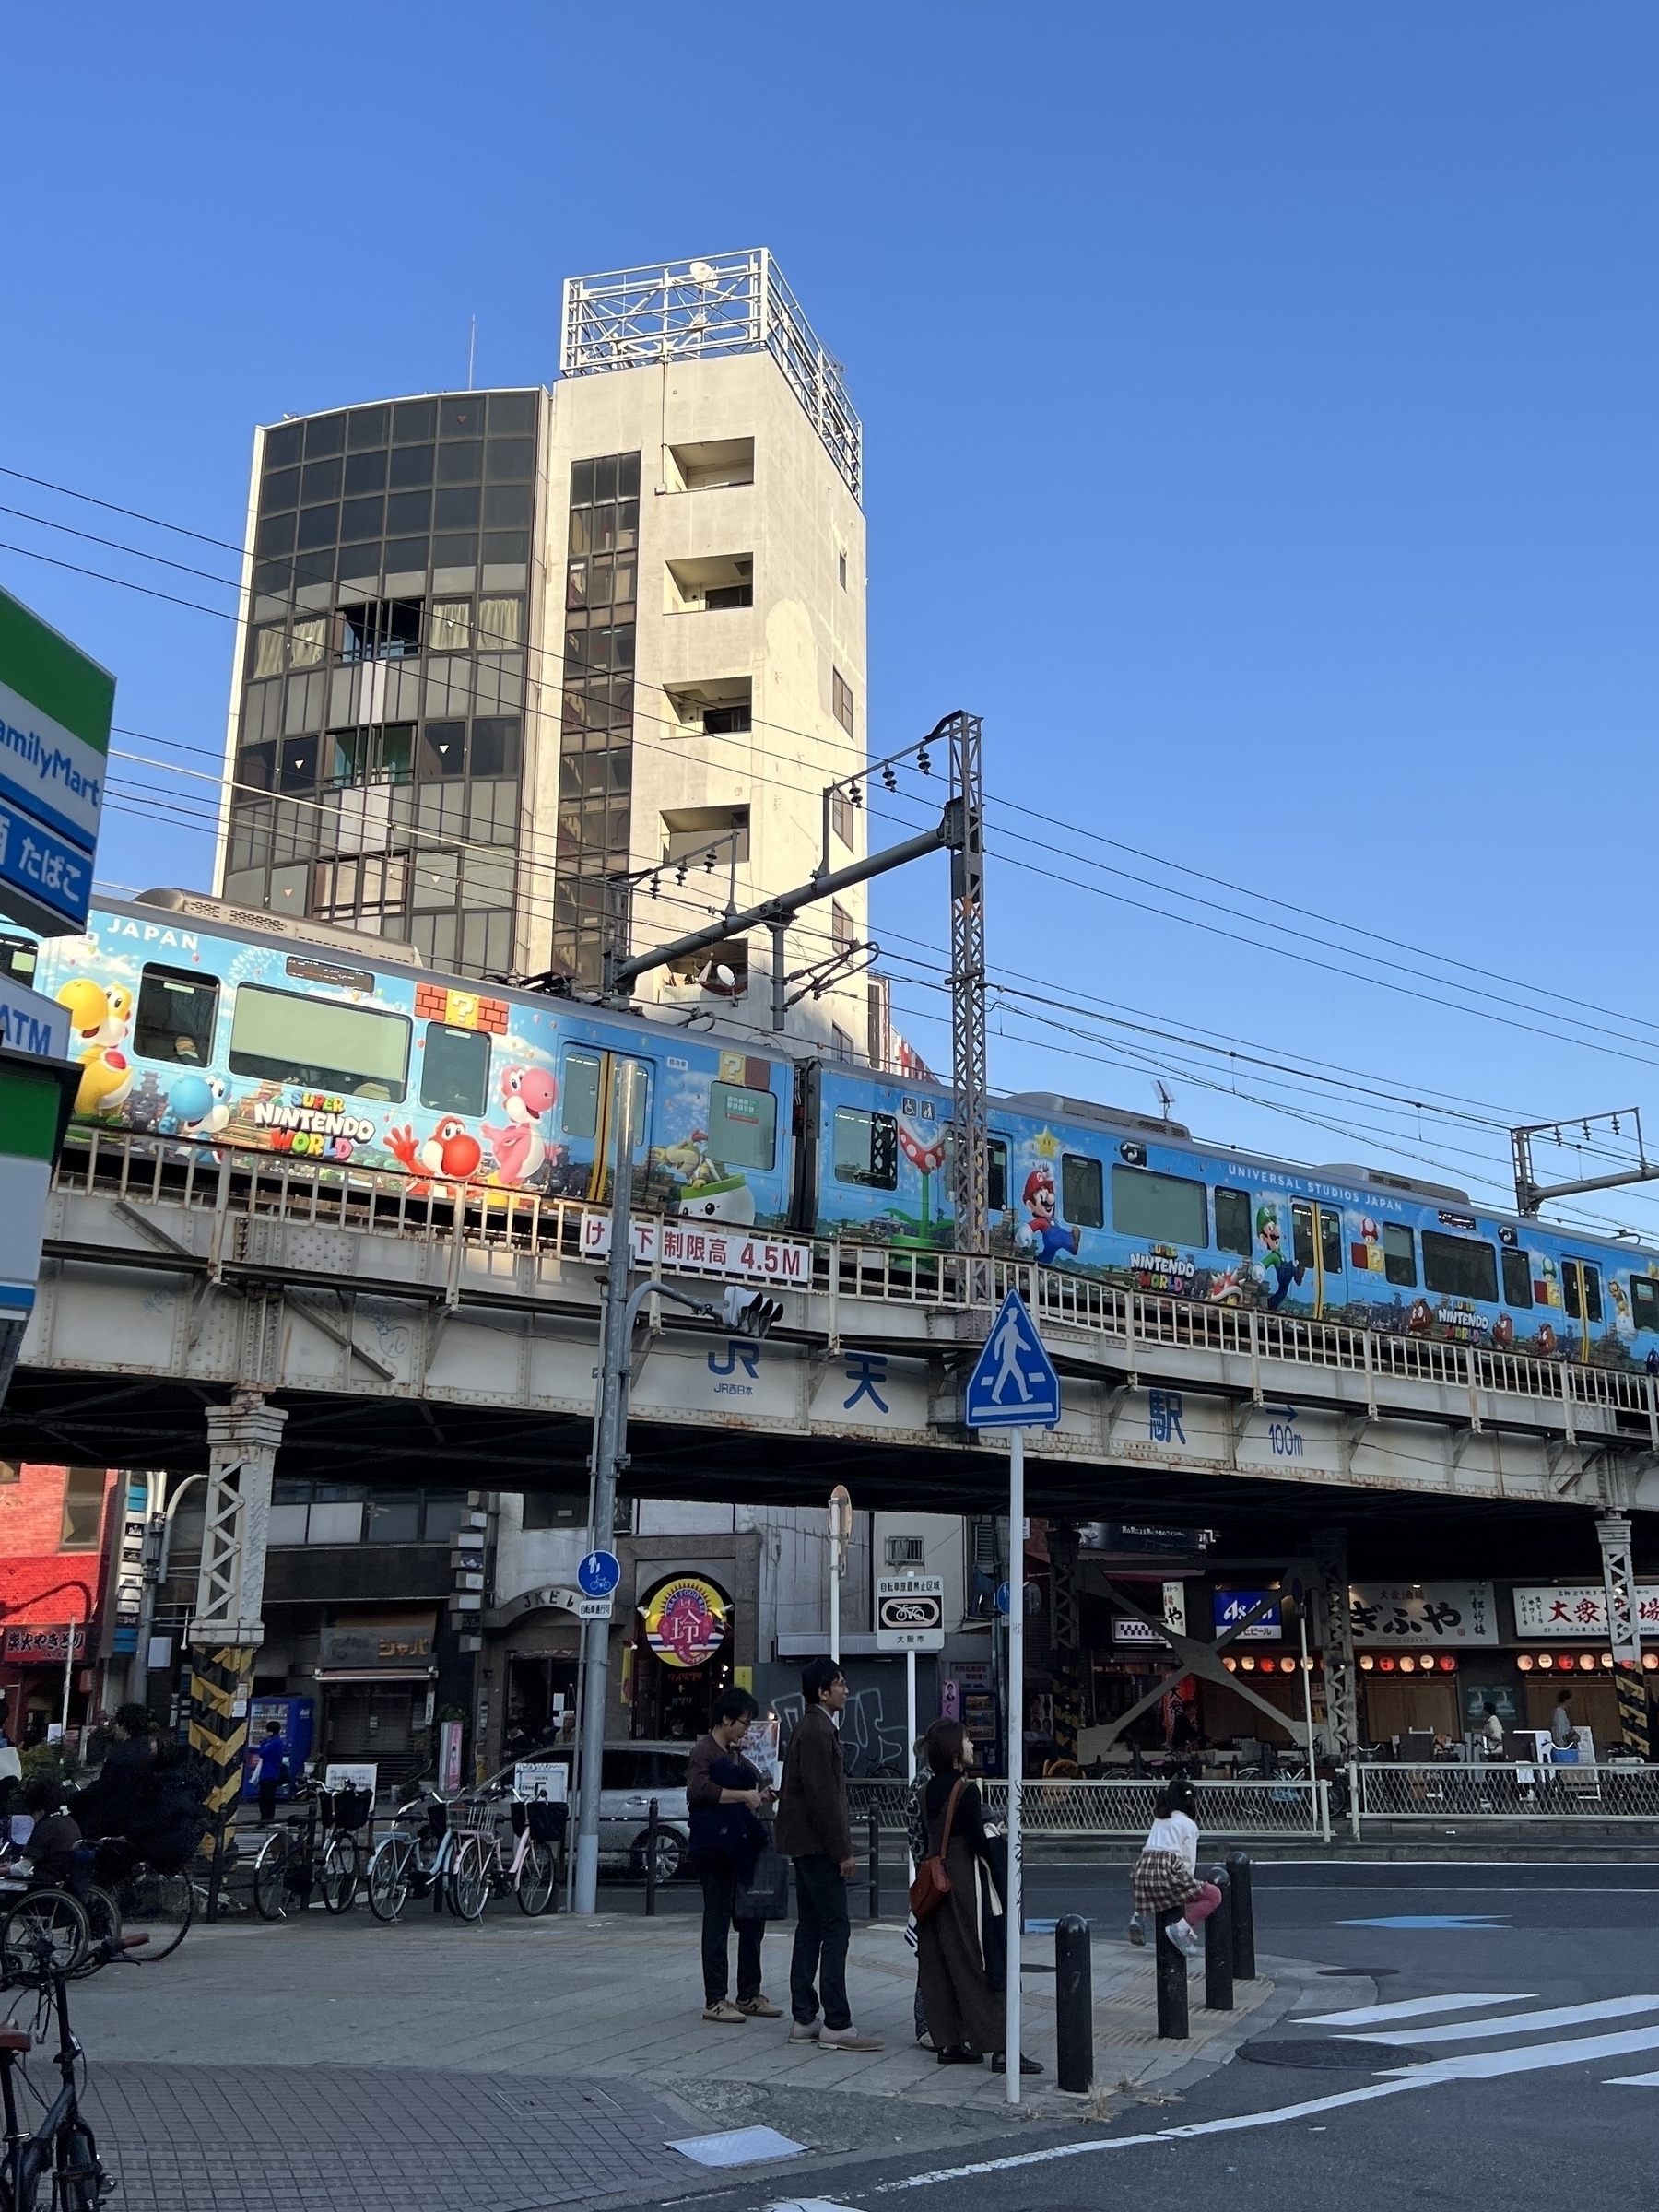 Colourful JR train with SUPER NINTENDO WORLD wrap passes over an Osaka intersection